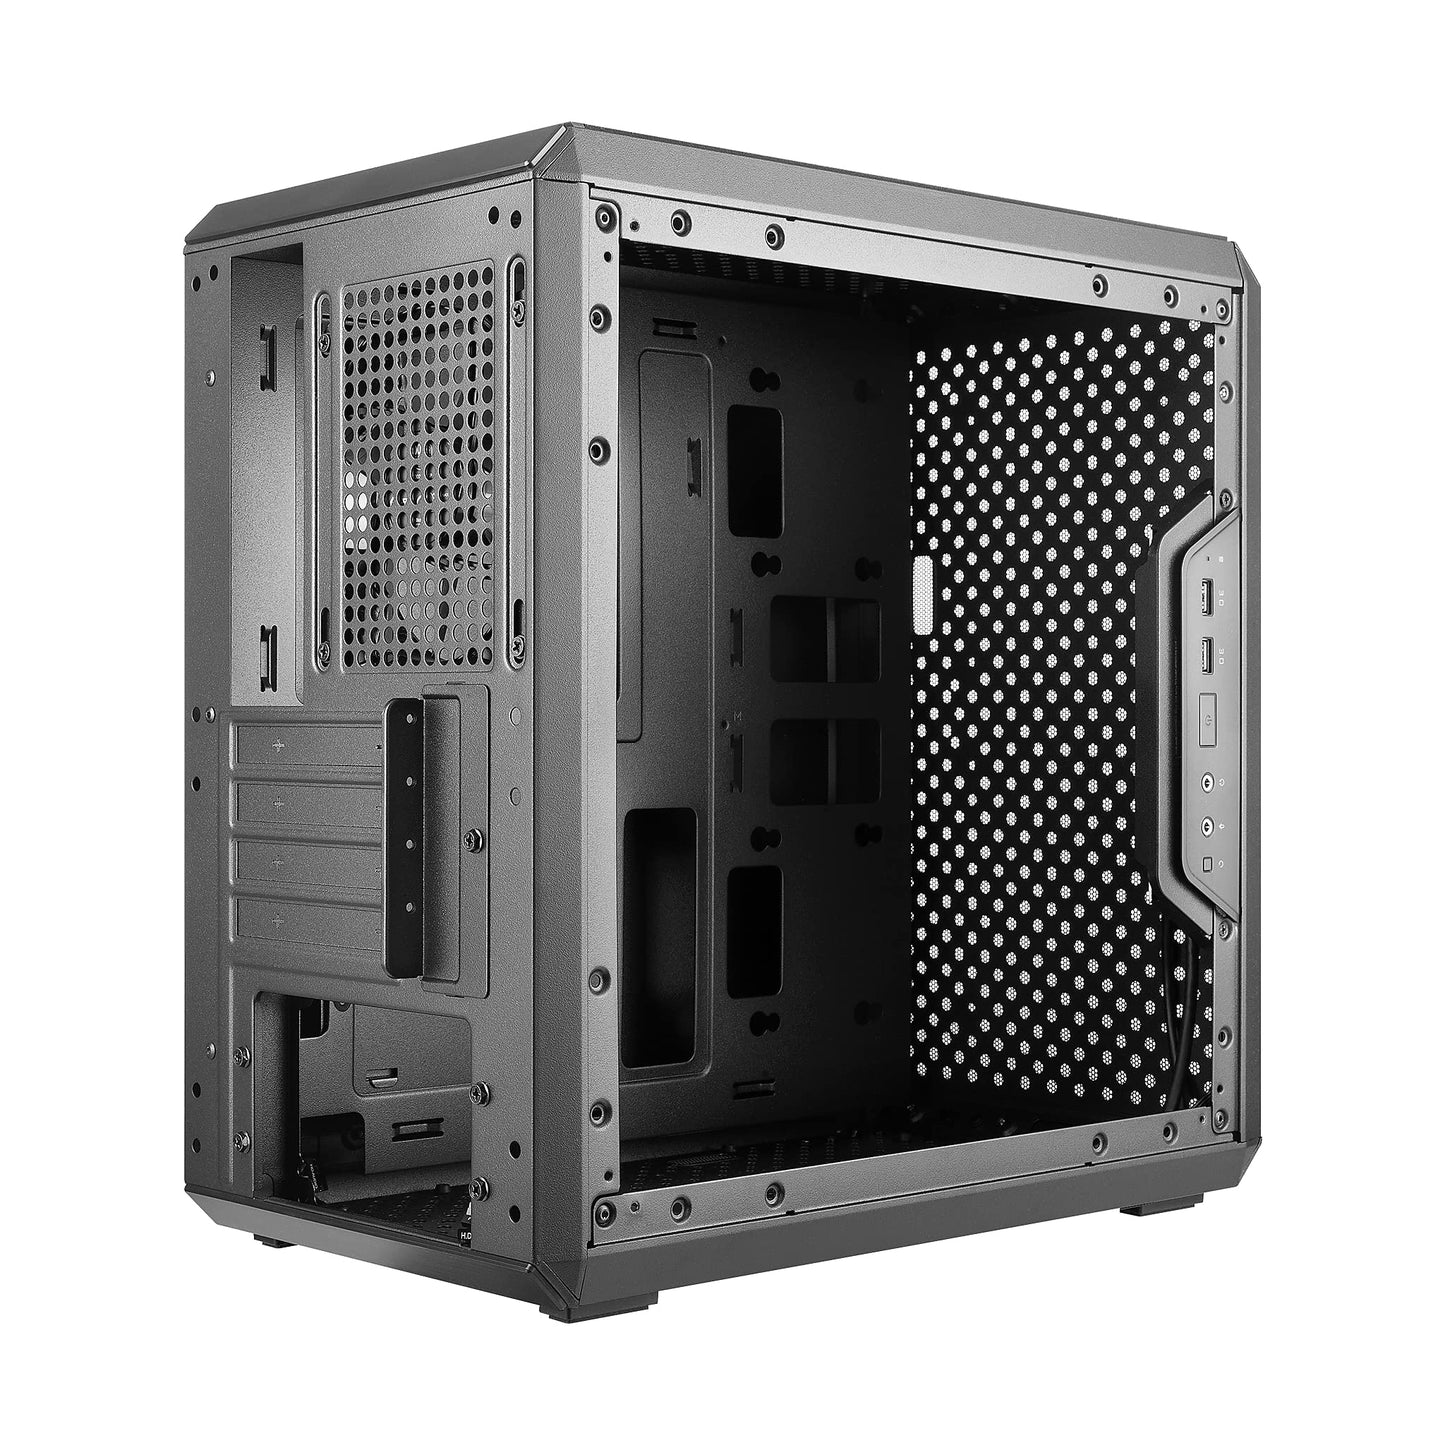 Cooler Master MasterBox Q300L Micro-ATX Tower with Magnetic Design Dust Filter, Transparent Acrylic Side Panel, Adjustable I/O & Fully Ventilated Airflow, Black (MCB-Q300L-KANN-S00)